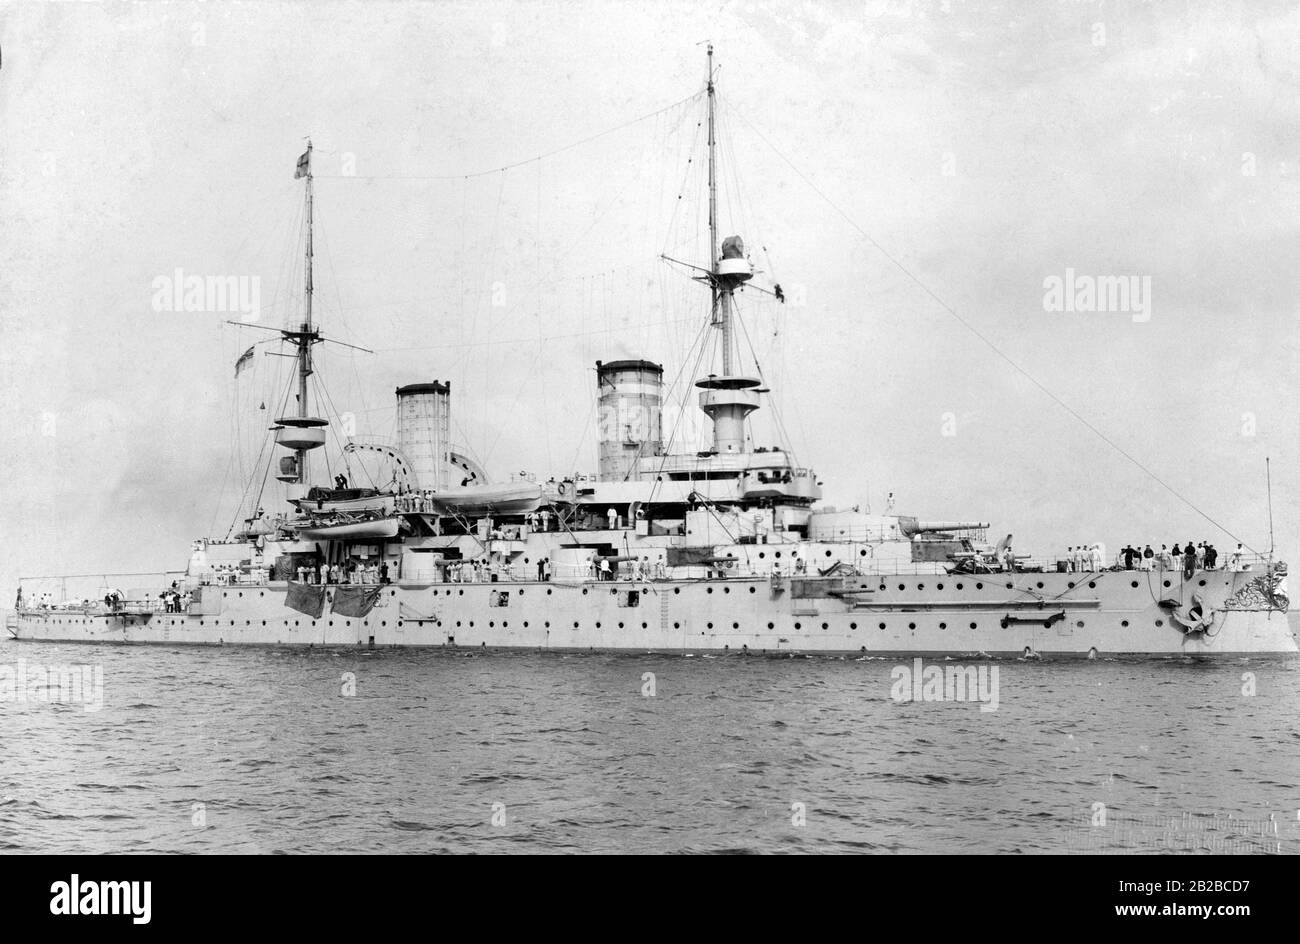 The SMS 'Kaiser Friedrich III' was a liner of the Imperial Navy. It was named after the German Emperor and King of Prussia, Emperor Frederick III, and is assigned to the Kaiser-Friedrich Class. The picture is undated. Stock Photo